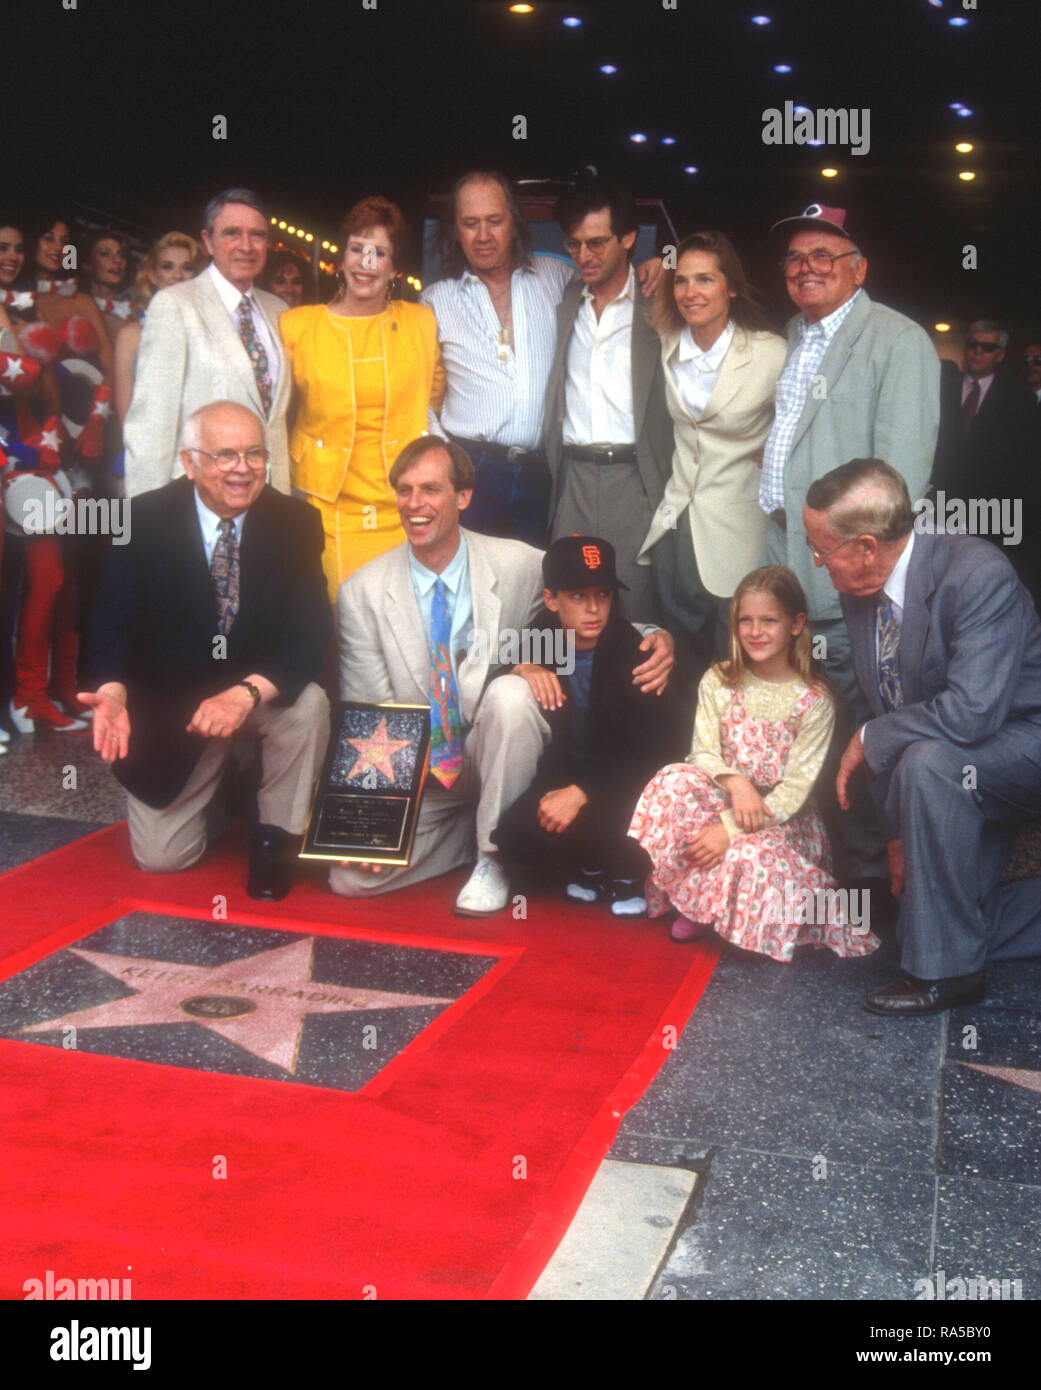 HOLLYWOOD, CA - JULY 15: Actress Carol Burnett, actor David Carradine, actor Robert Carradine, Sandra Will Carradine, actor/honoree Keith Carradine, son Cade Carradine and guests attend ceremony for his Star Ceremony on July 15, 1993 on Hollywood Walk of Fame in Hollywood, California. Photo by Barry King/Alamy Stock Photo Stock Photo